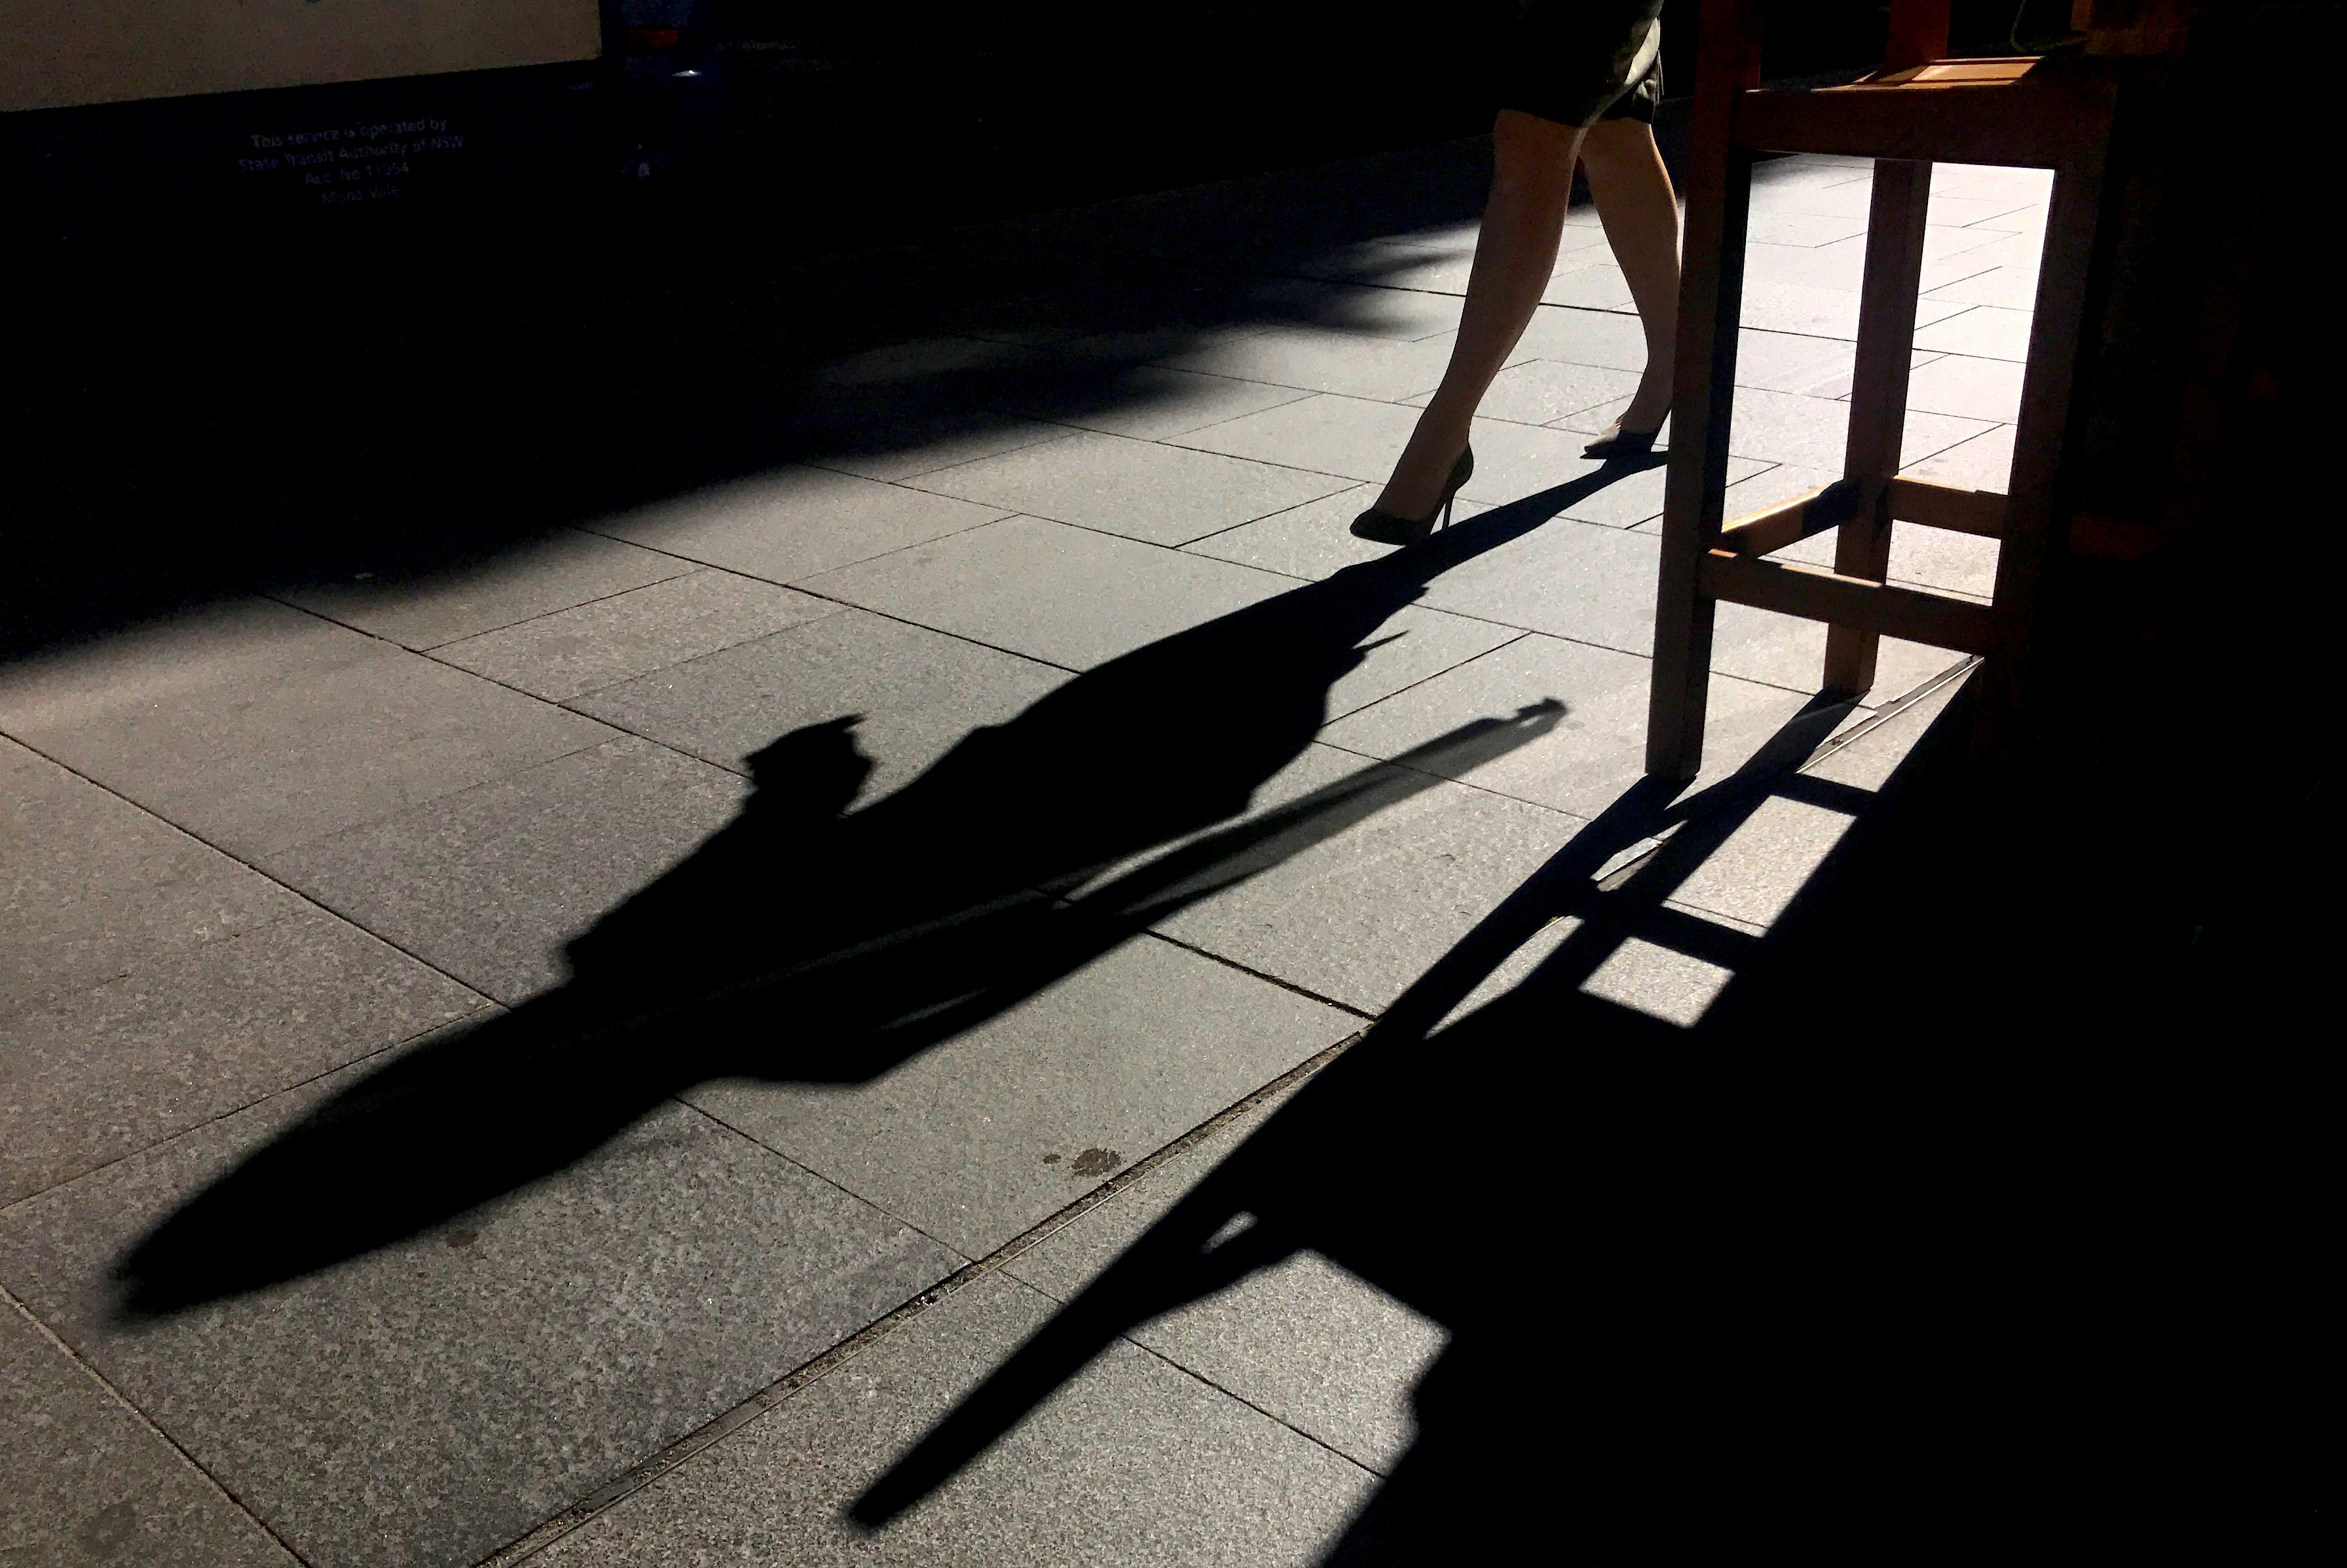 A woman casts a shadow as she walks along a footpath past a coffee shop on a sunny, winter day in central Sydney